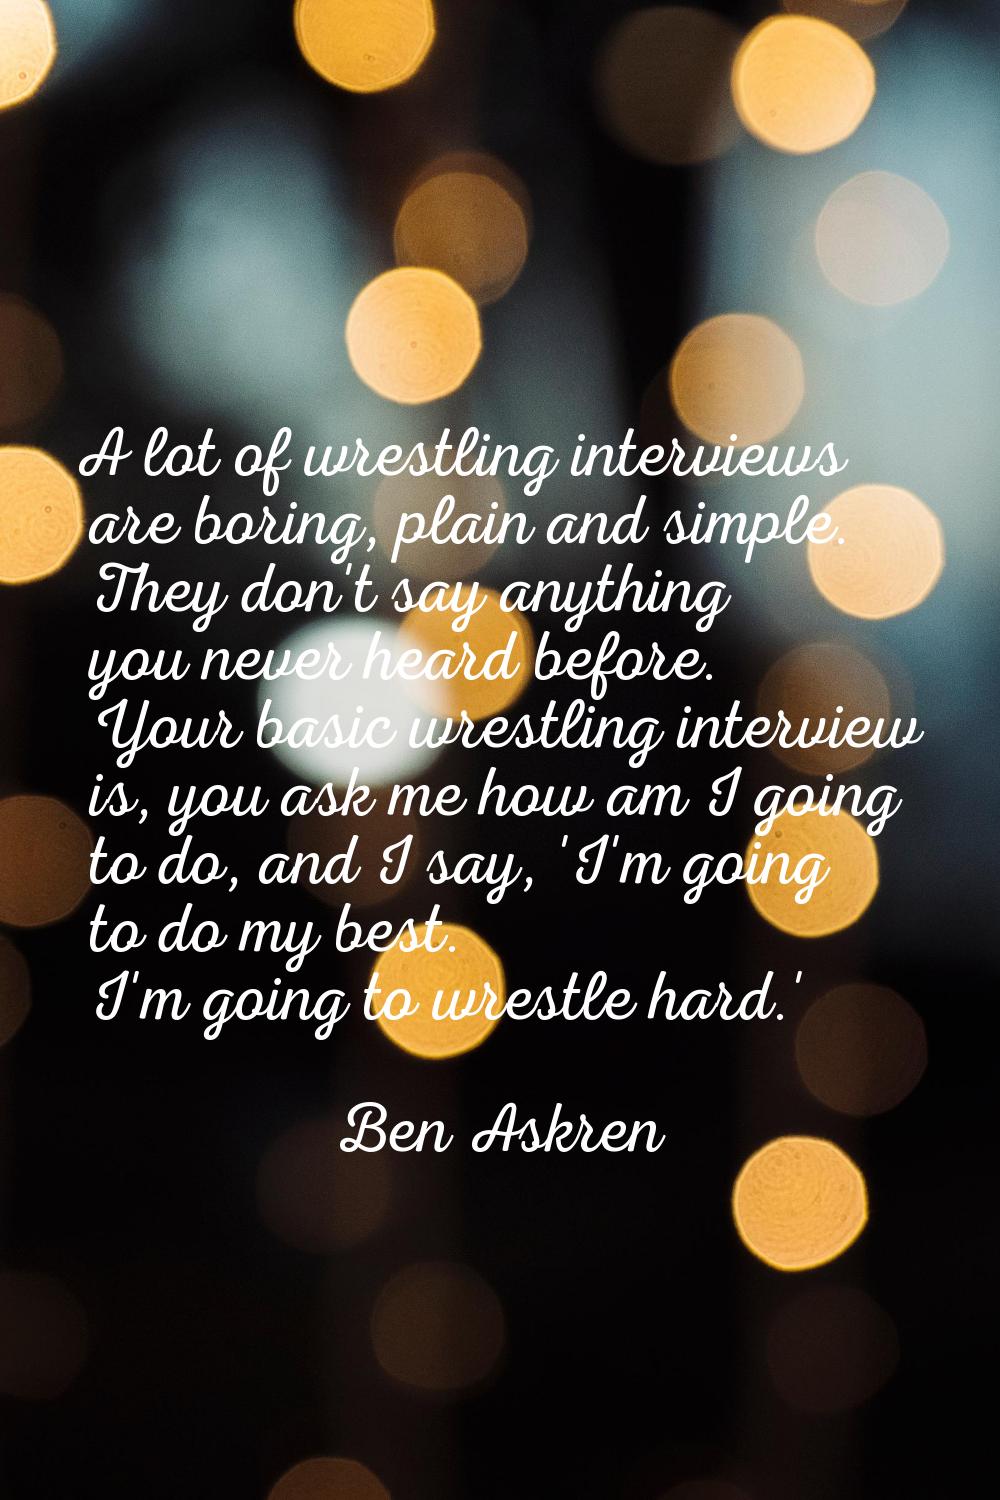 A lot of wrestling interviews are boring, plain and simple. They don't say anything you never heard